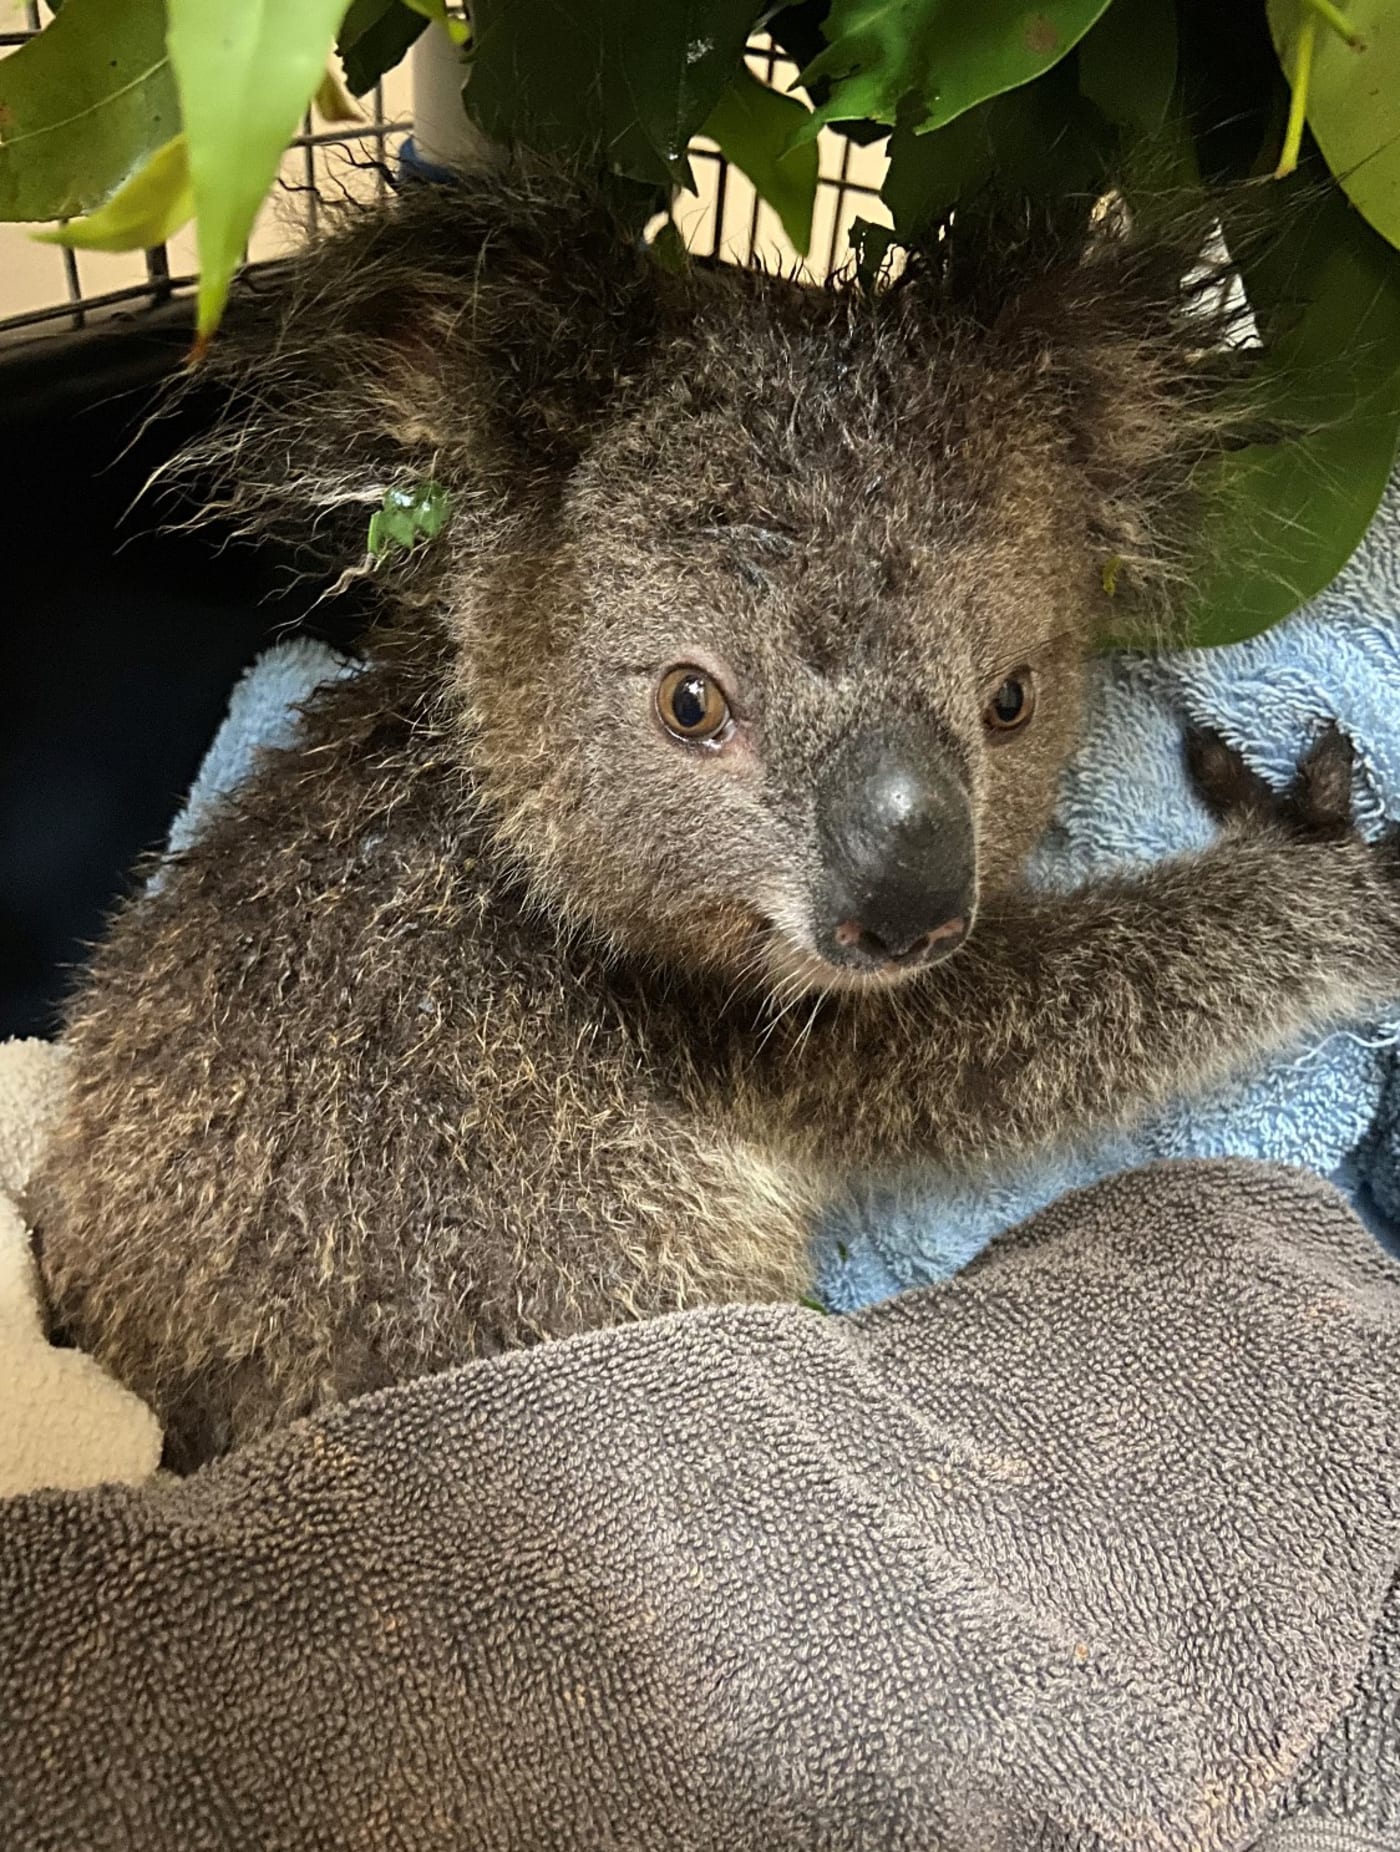 Gulliver is a 14-month-old koala joey. Friends of the Koala (FOTK) rescuers found him on the ground cold and alone in Tregeagle, NSW amid the Northern Rivers flood crisis. His mother sadly couldn't be found, so Gulliver was  assessed and then put into home care with a koala carer.